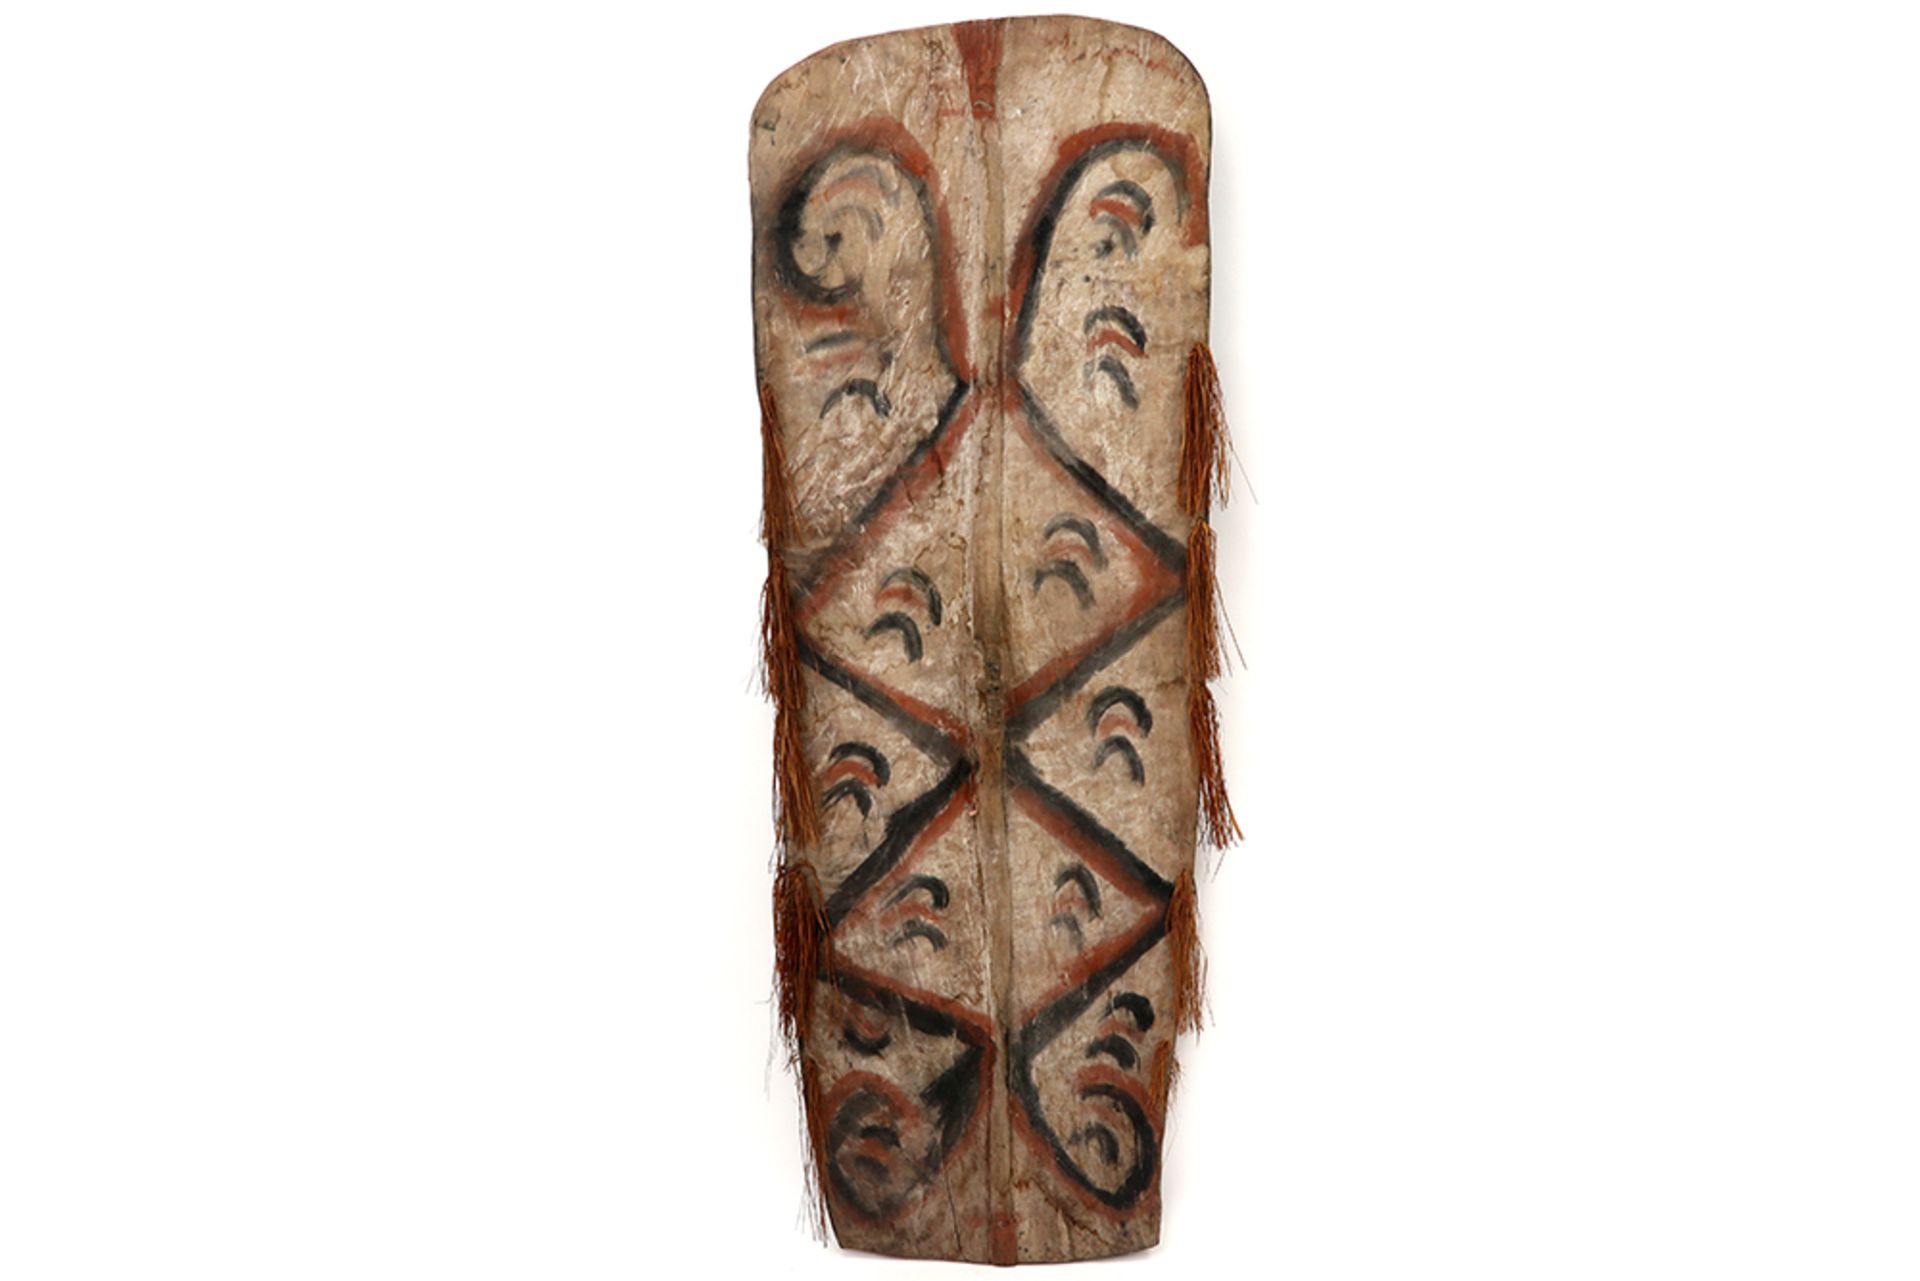 Papua New Guinean Asmat shield in wood with pigment polychromy, typical carvings and a figure on the - Image 2 of 2